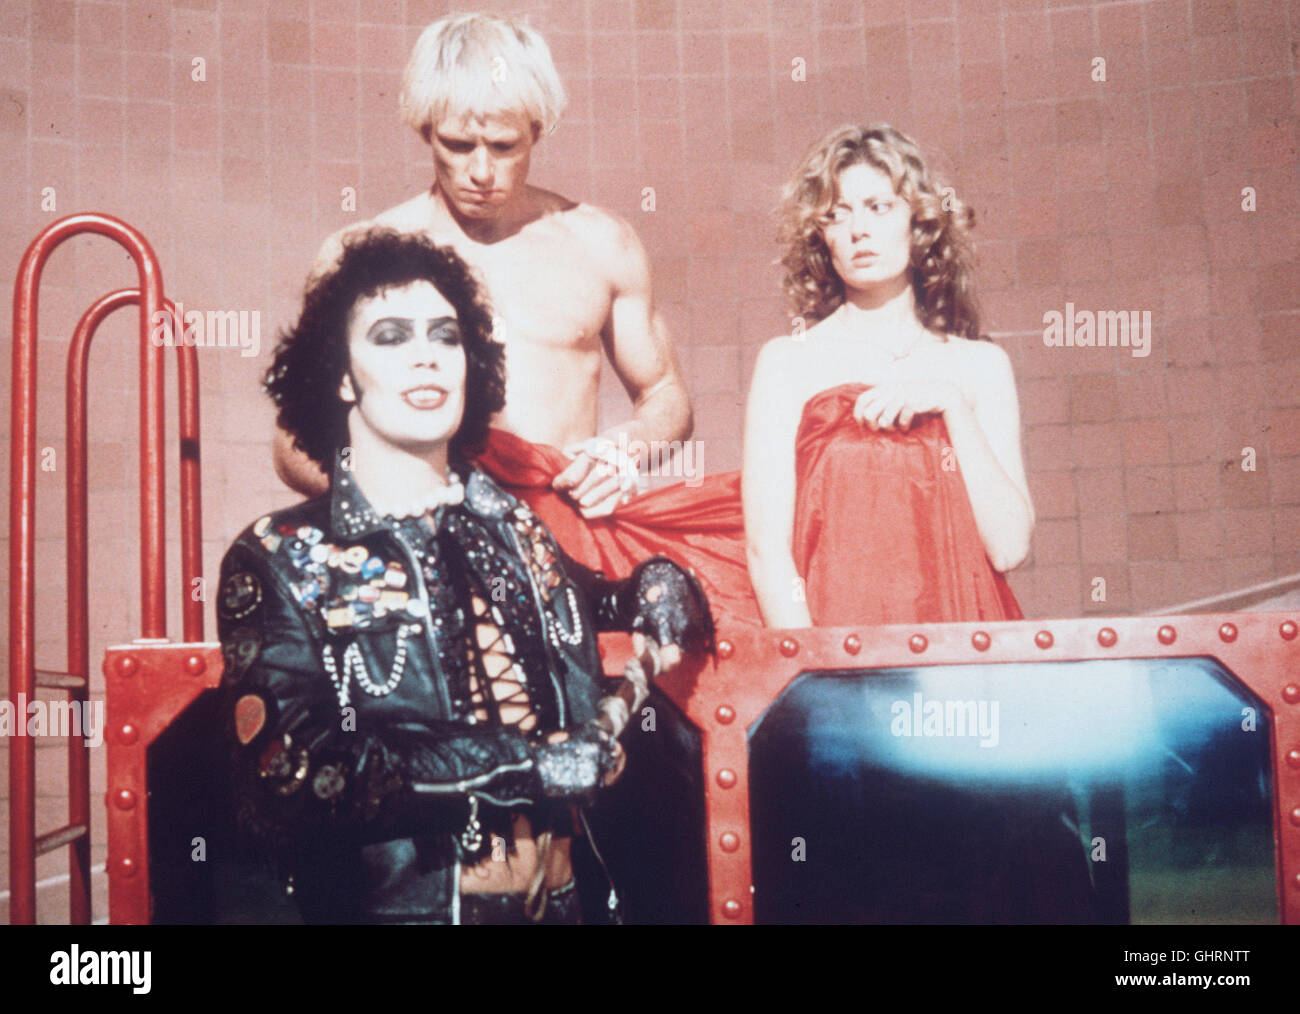 DIE ROCKY HORROR PICTURE SHOW TIM CURRY (Dr. Frank N. Furter), PETER  HINWOOD (Rocky Horror), SUSAN SARANDON (Janet Weiss) Regie: Jim Sharman  aka. The Rocky Horror Picture Show Stock Photo - Alamy